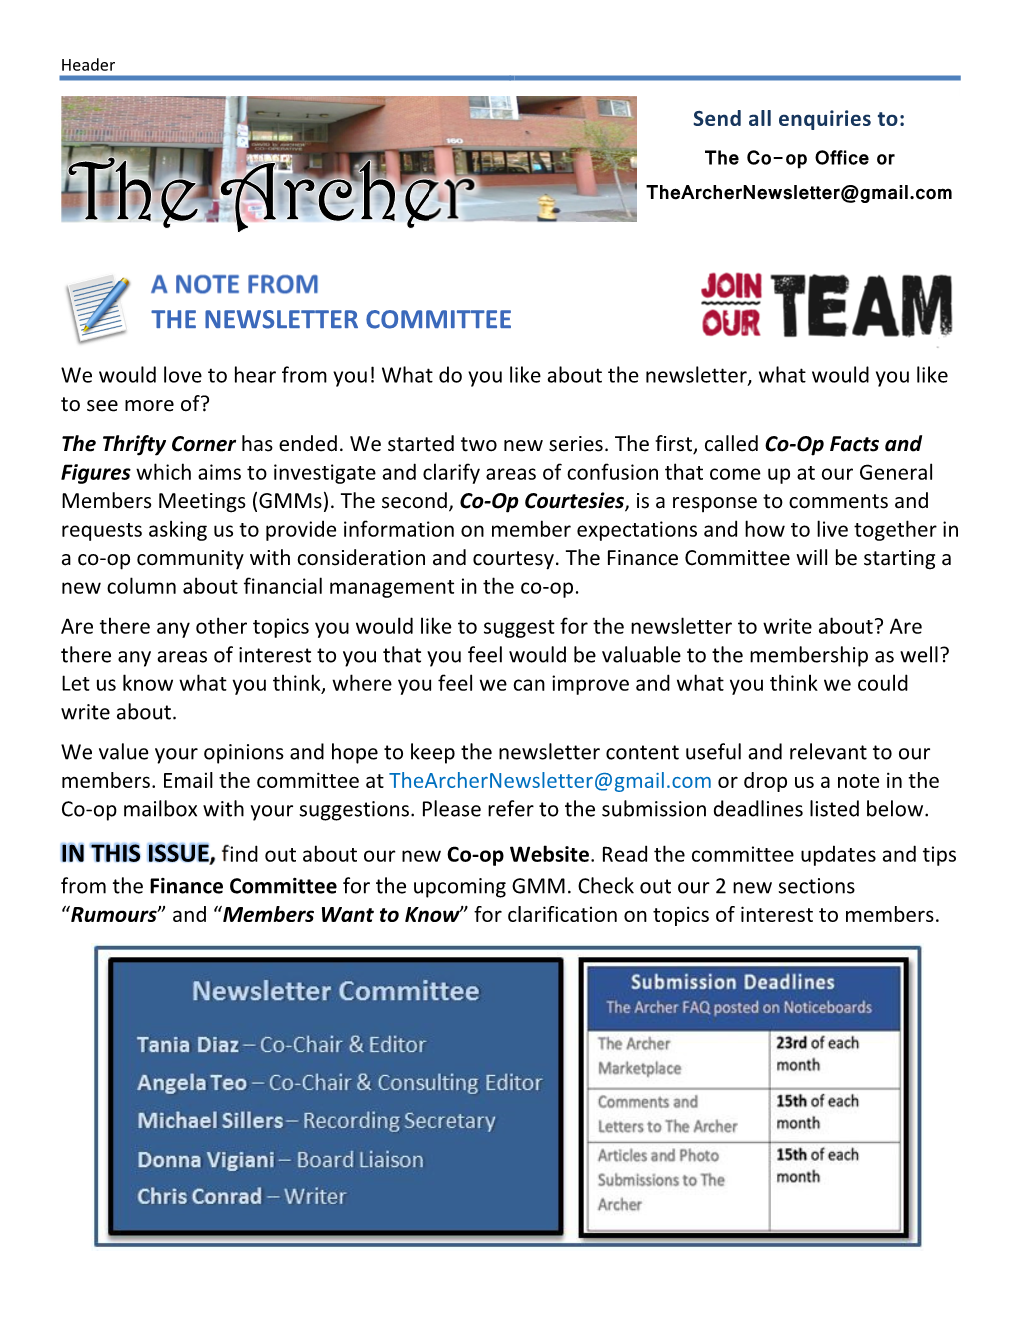 A Note from the Newsletter Committee